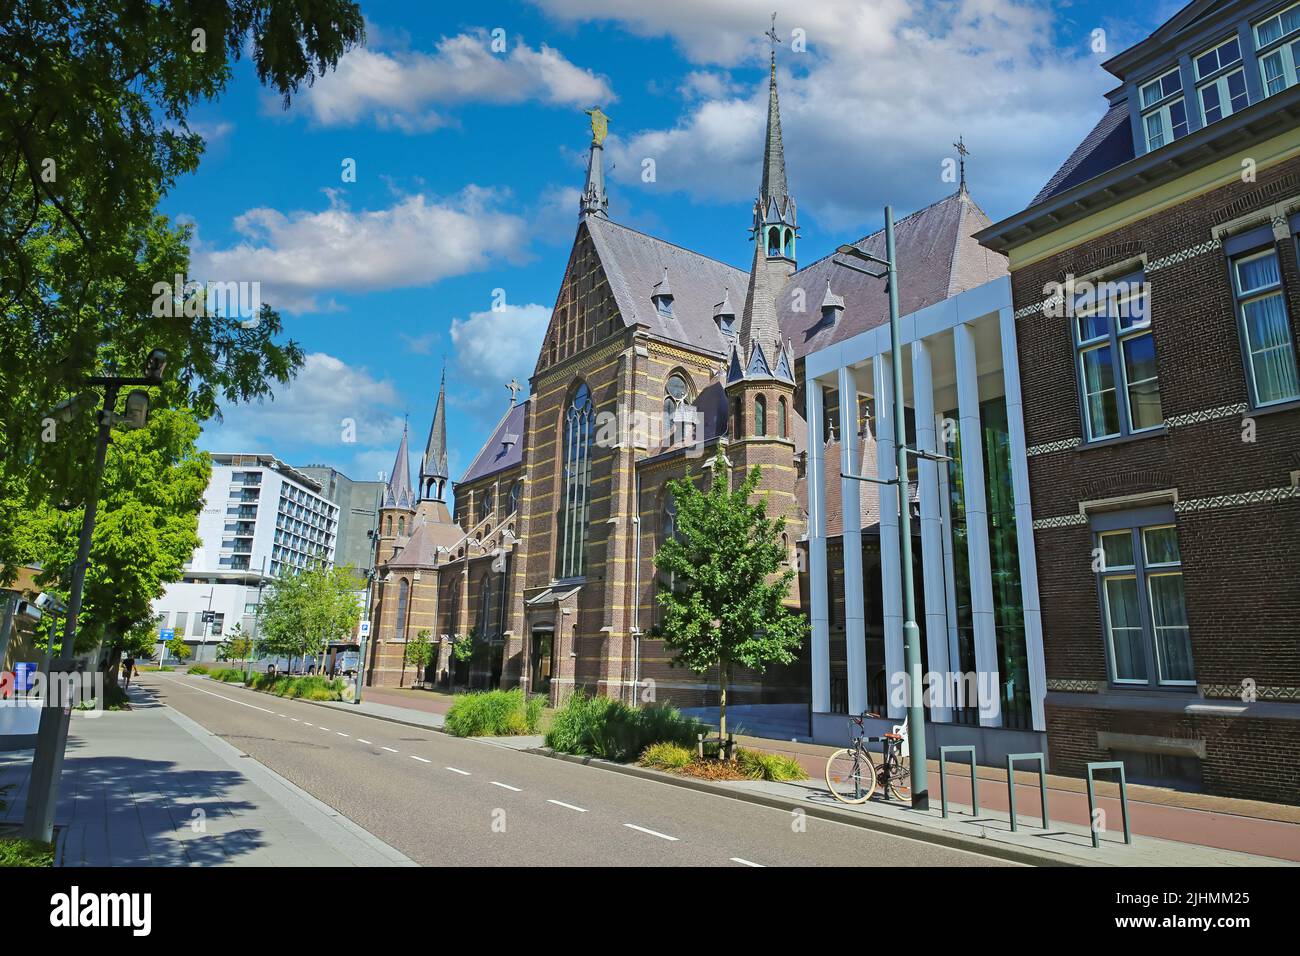 Eindhoven, Netherlands - July 17. 2022: City street with medieval gothic augustine church and marienhage hotel, blue summer sky fluffy clouds Stock Photo